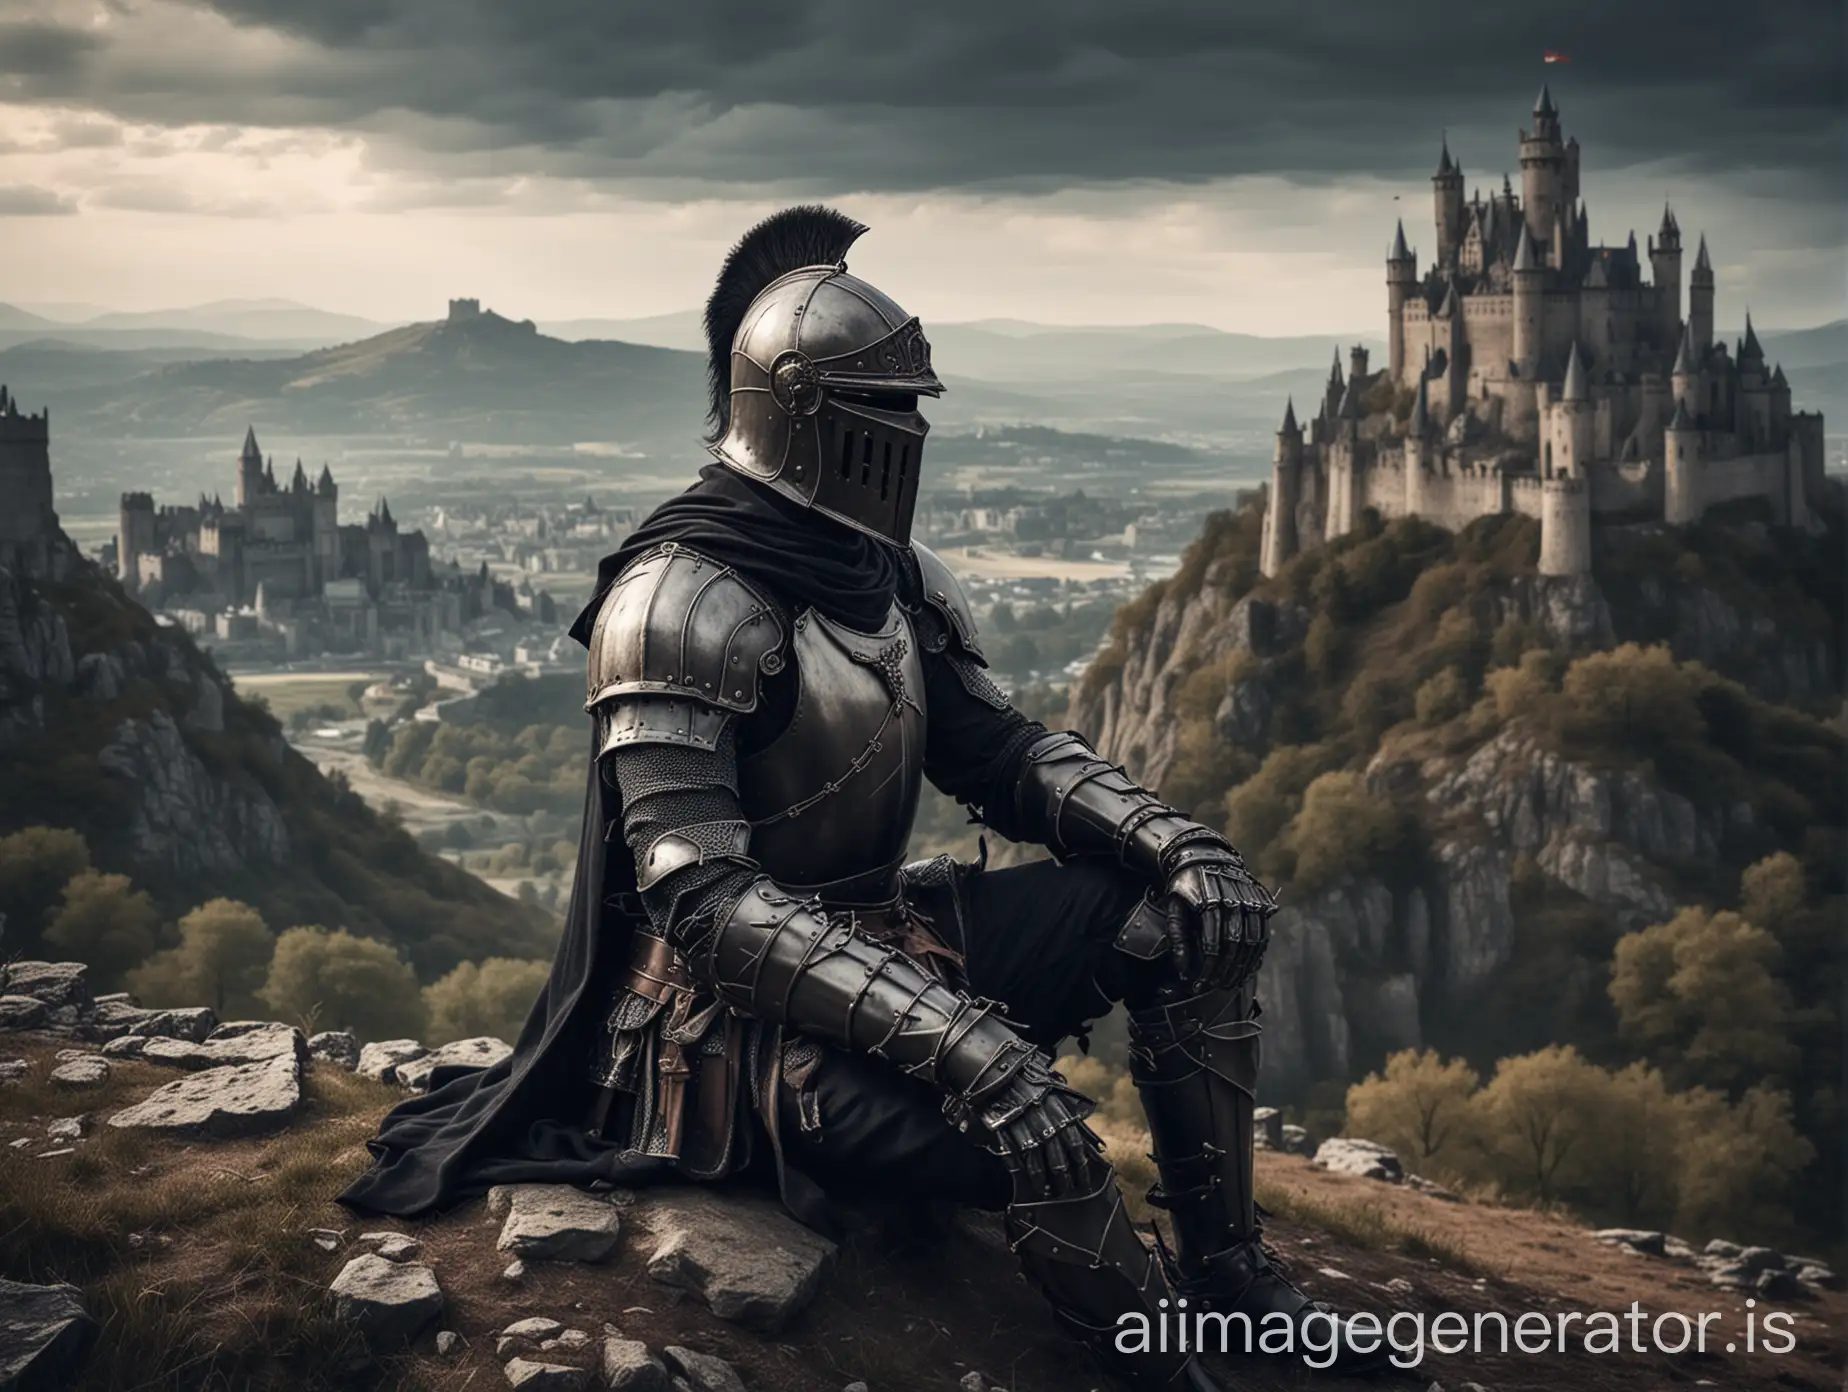 Medieval-Knight-Resting-on-Hill-with-Castle-Silhouetted-in-Dark-Fantasy-Scene